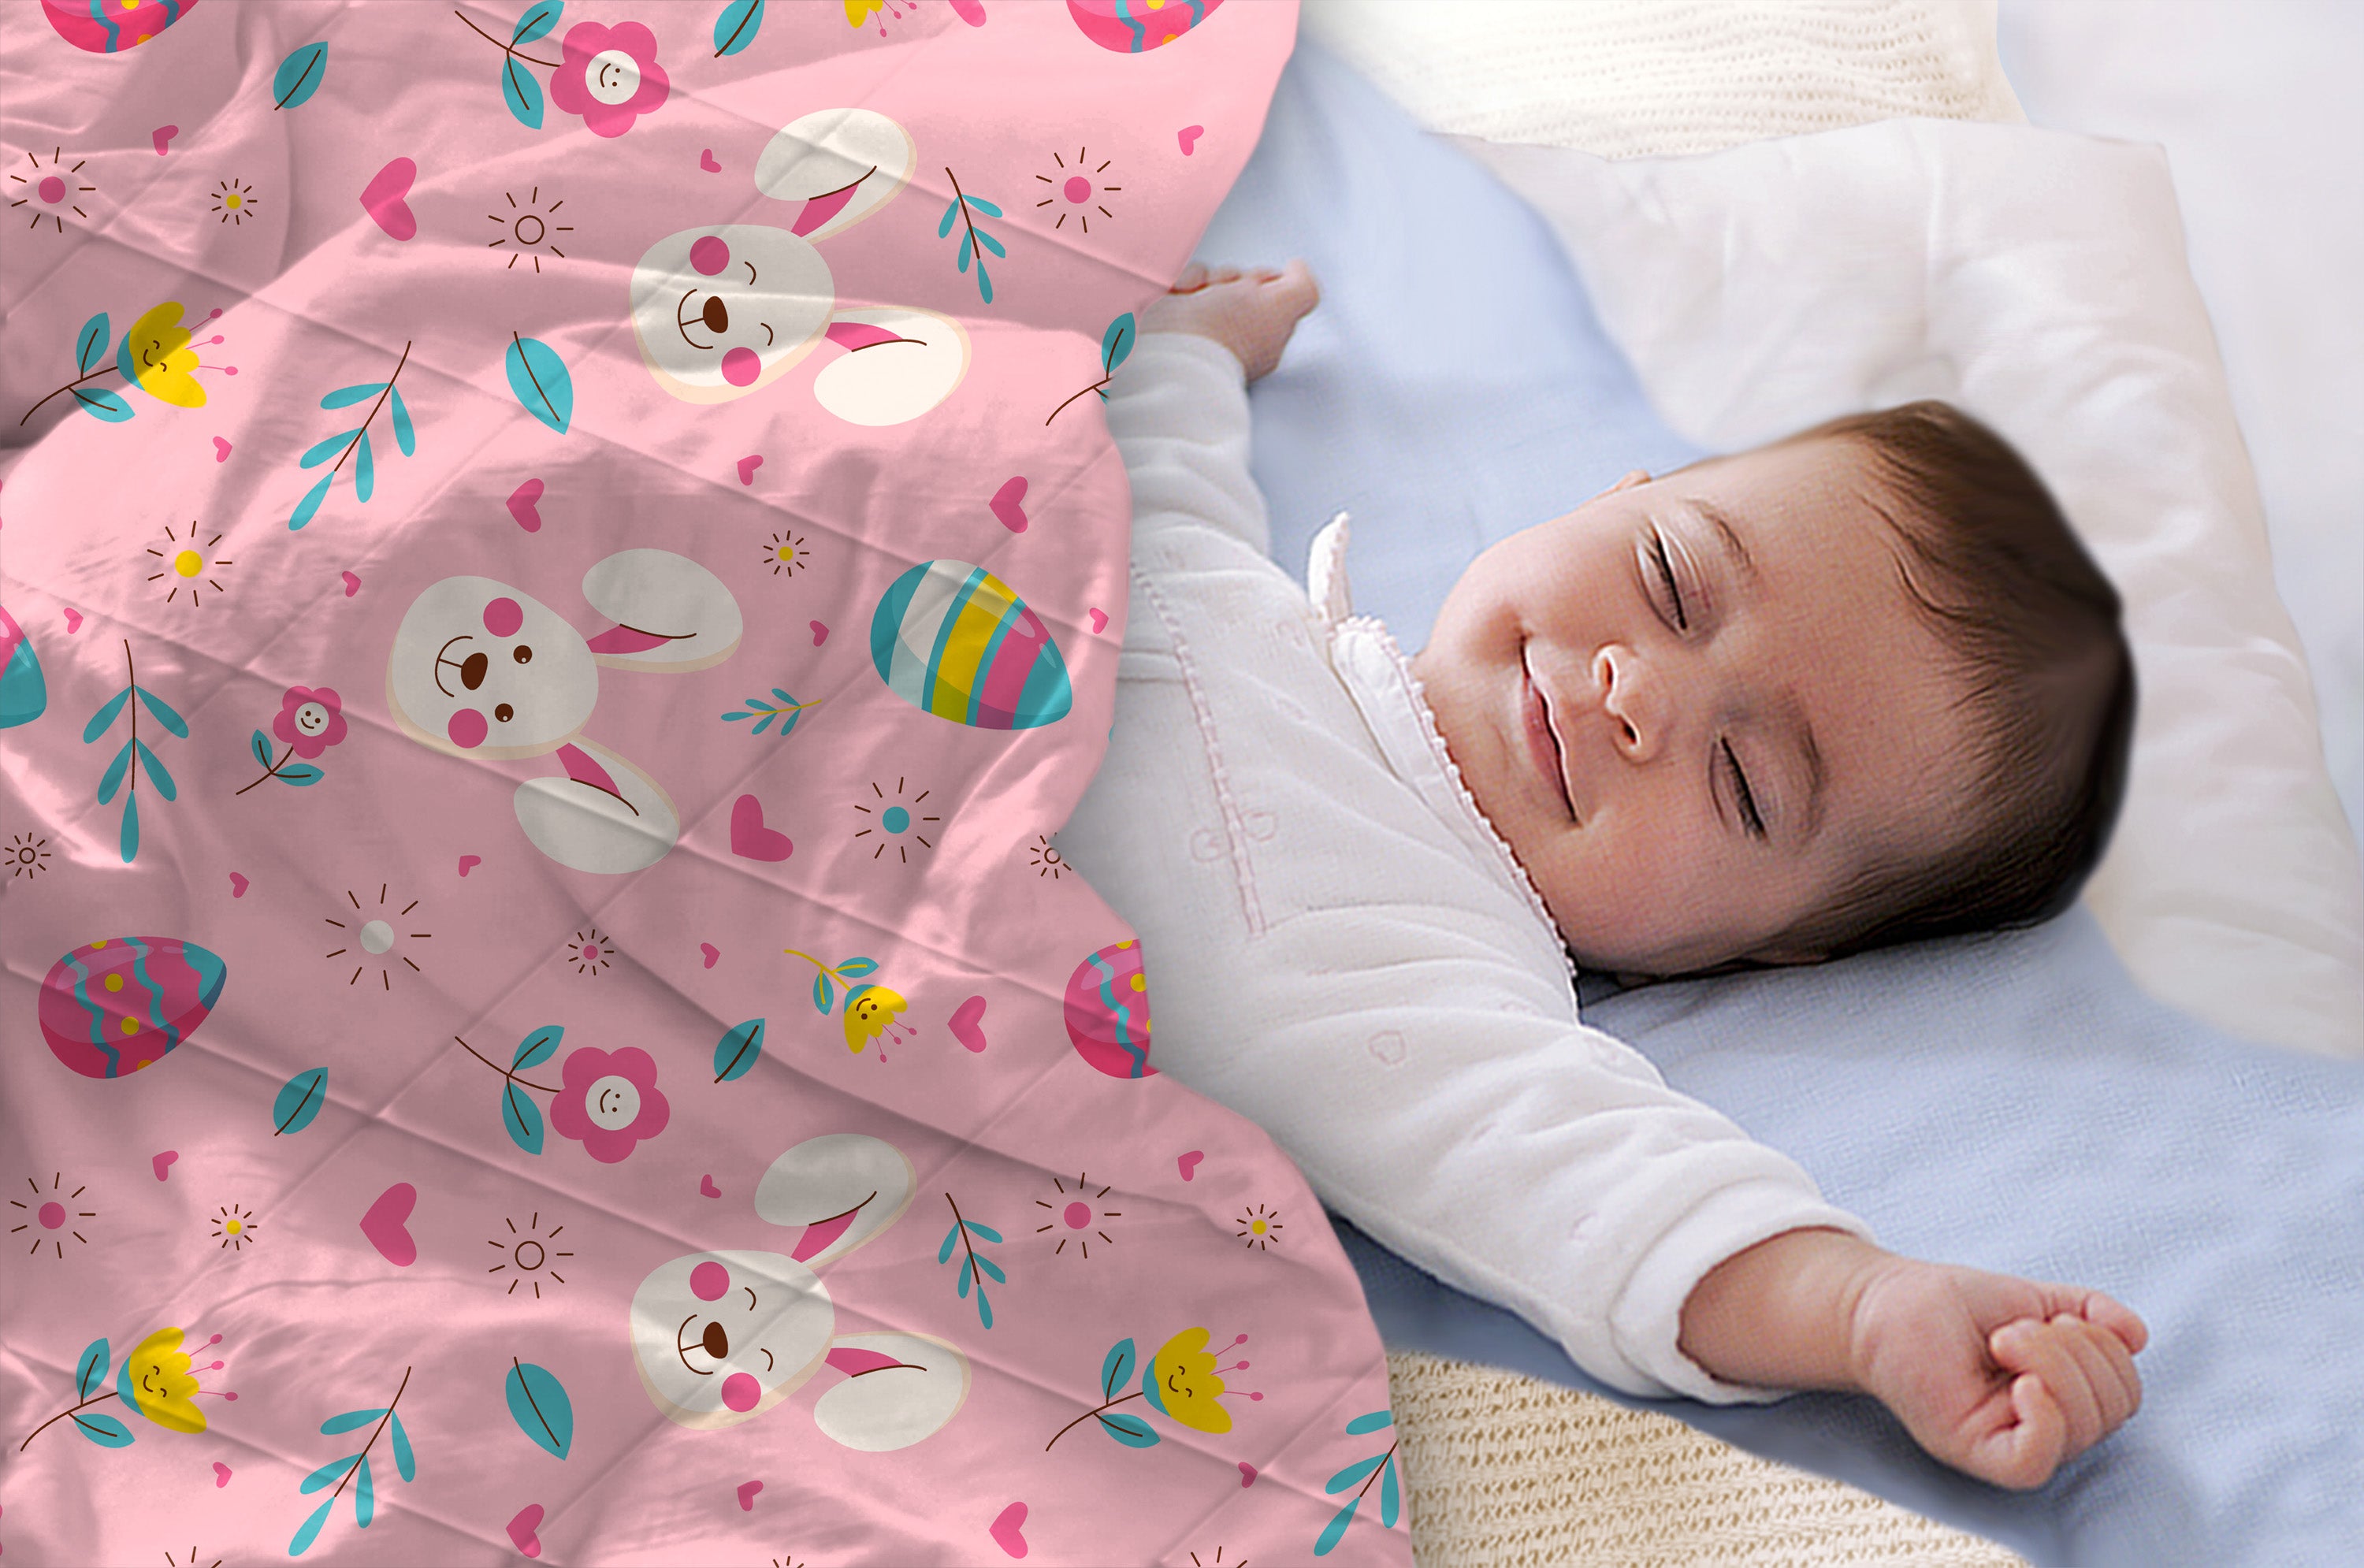 HARE Baby Super Soft Microfiber Reversible All Season Use Blanket (42" X 30")(0-2 Years)(PINK)